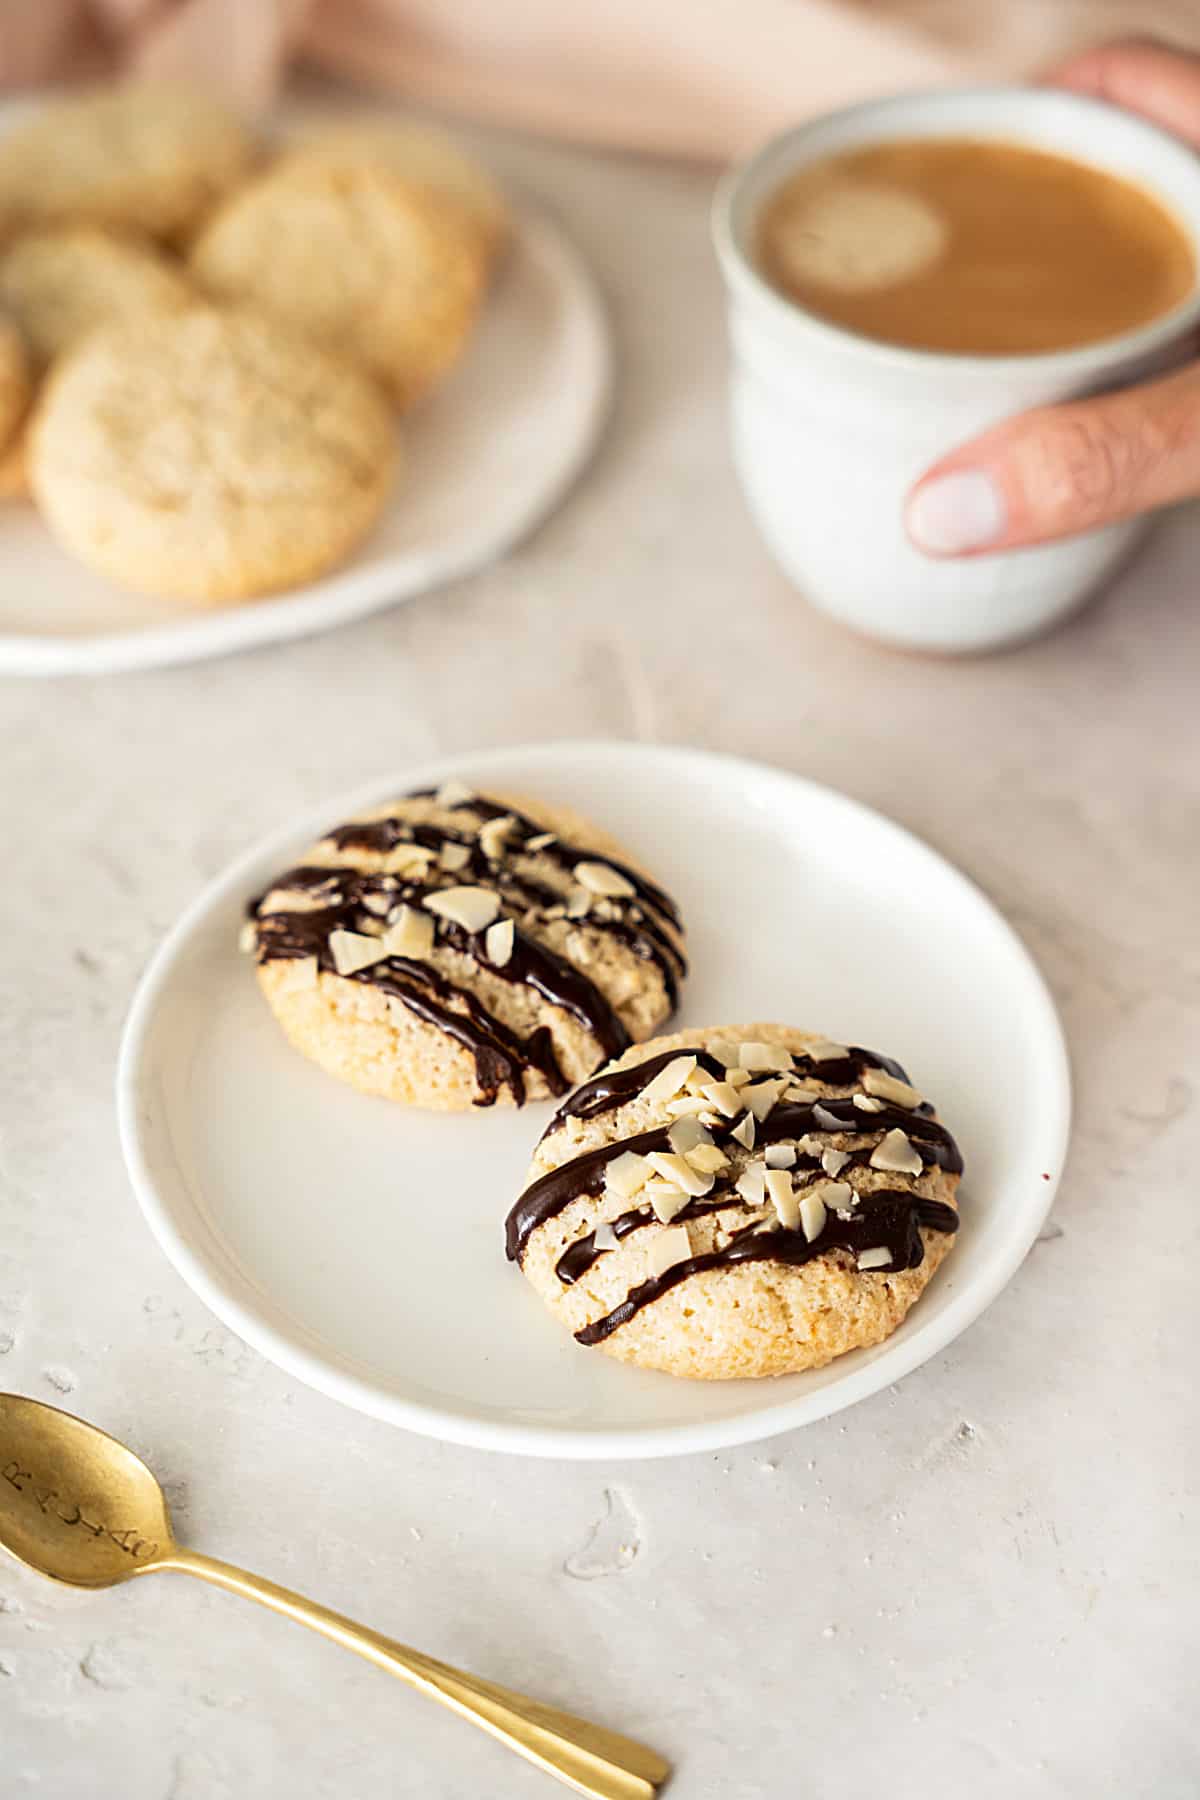 White plates with plain and chocolate drizzled almond cookies. Hand holding coffee cup, golden spoon, grey surface.